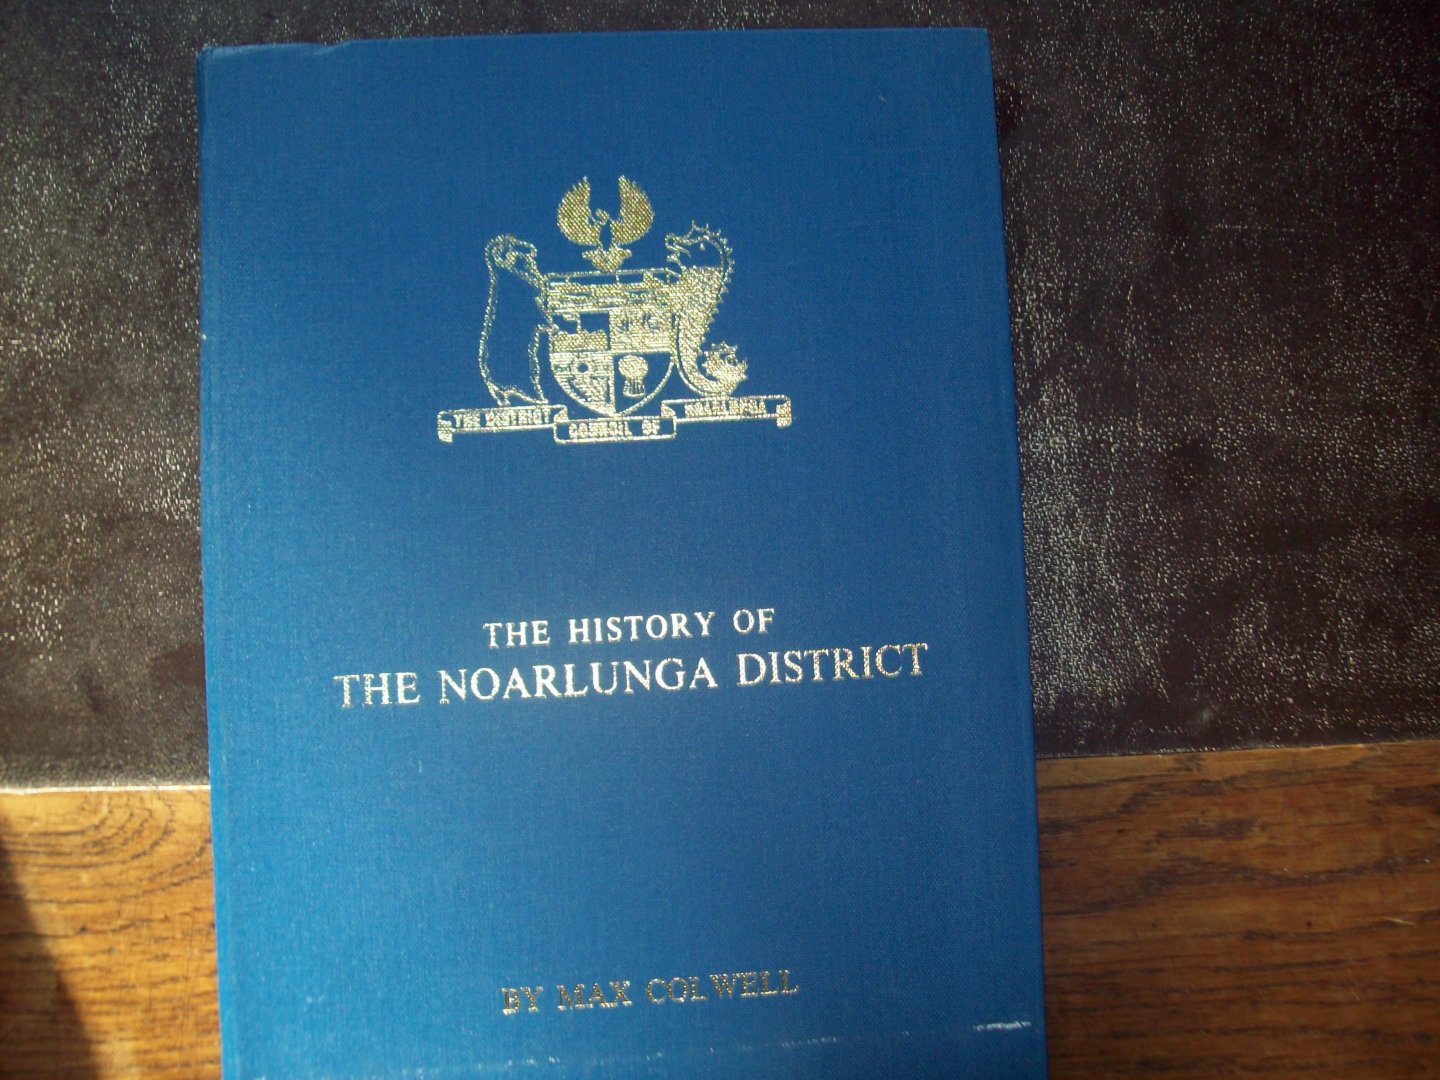 Max Colwell - "The History of the Noarlunga District"